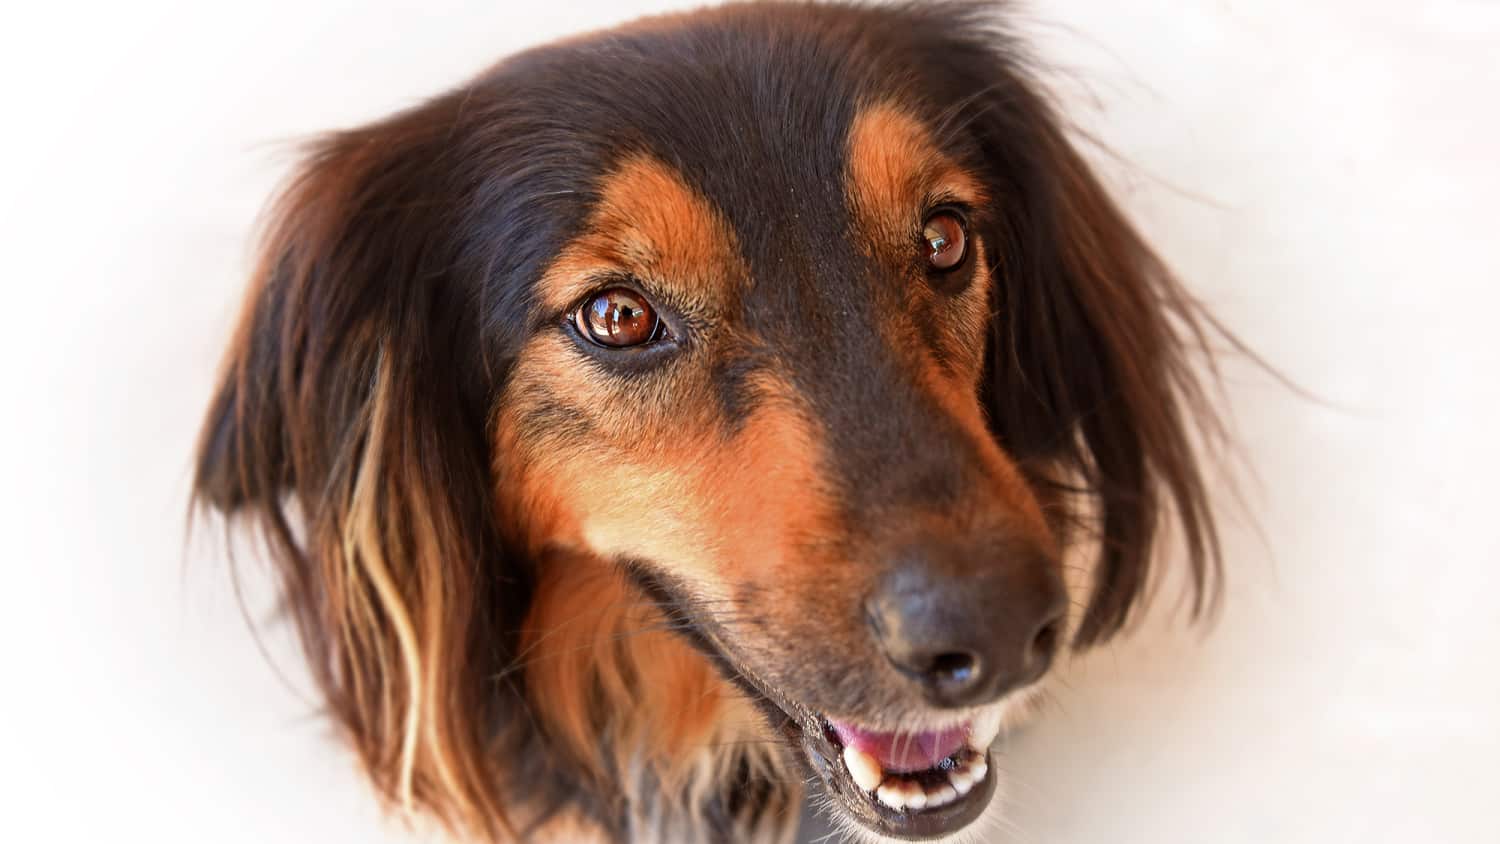 Close-up of a dog's face with a hopeful expression